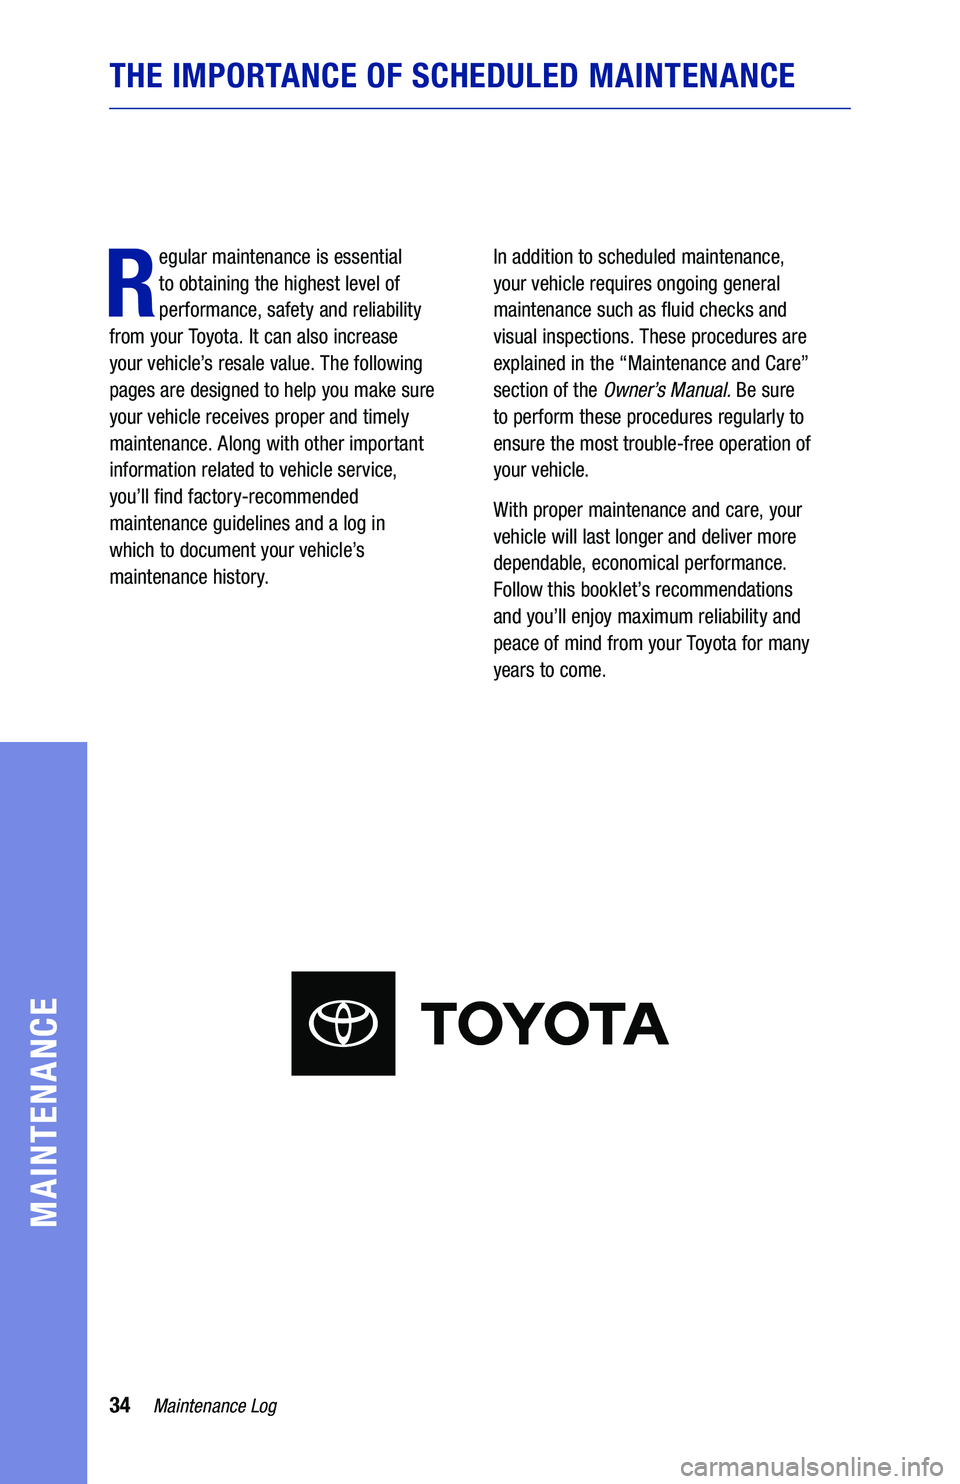 TOYOTA COROLLA HATCHBACK 2020  Warranties & Maintenance Guides (in English) 34
R
egular maintenance is essential  
to obtaining the highest level of 
performance, safety and reliability  
from your Toyota. It can also increase  
your vehicle’s resale value. The following 
p